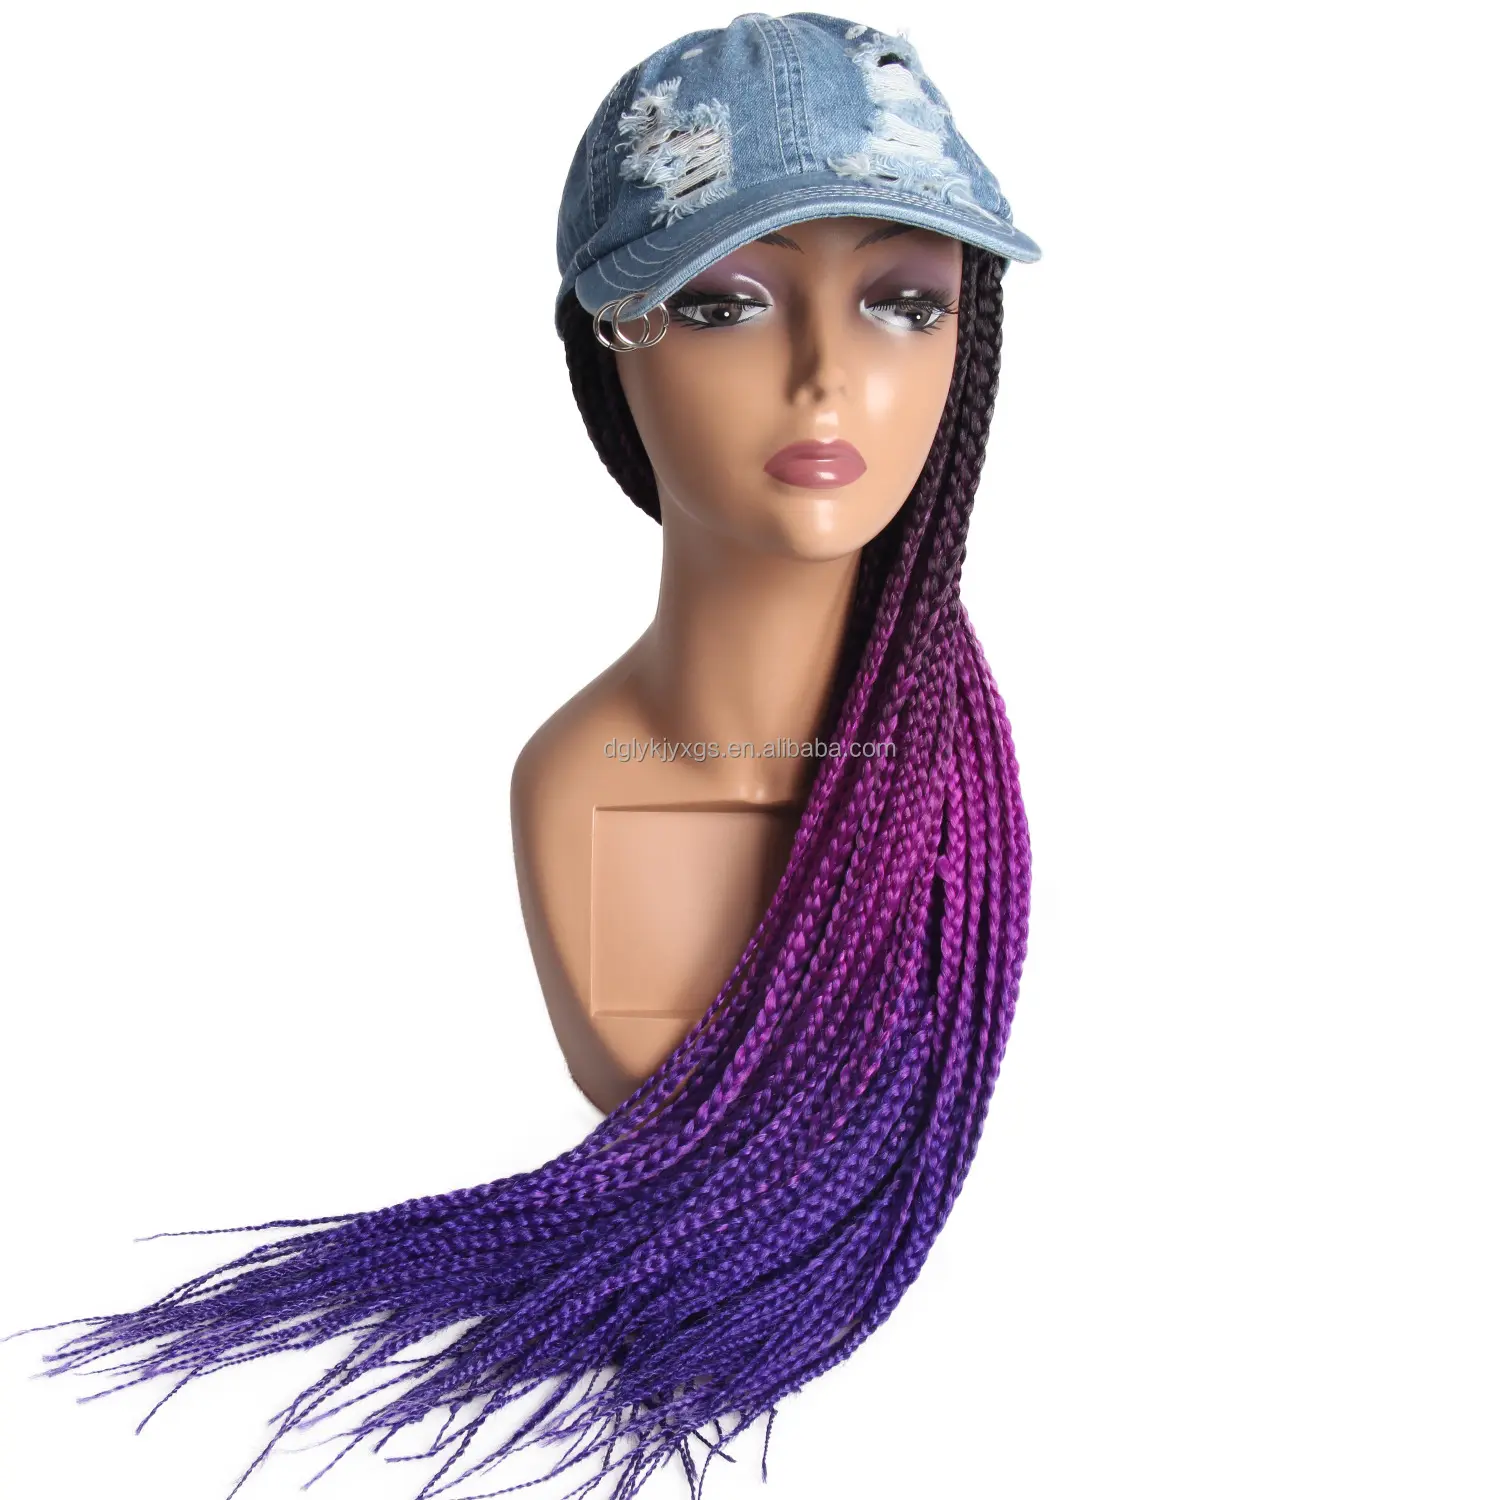 WM02 Hot Selling Trendy Wigs Cap Hairstyle Hair Weft With Black Cap Synthetic Braided Wig And Cap Combo Fashion Capdo Style